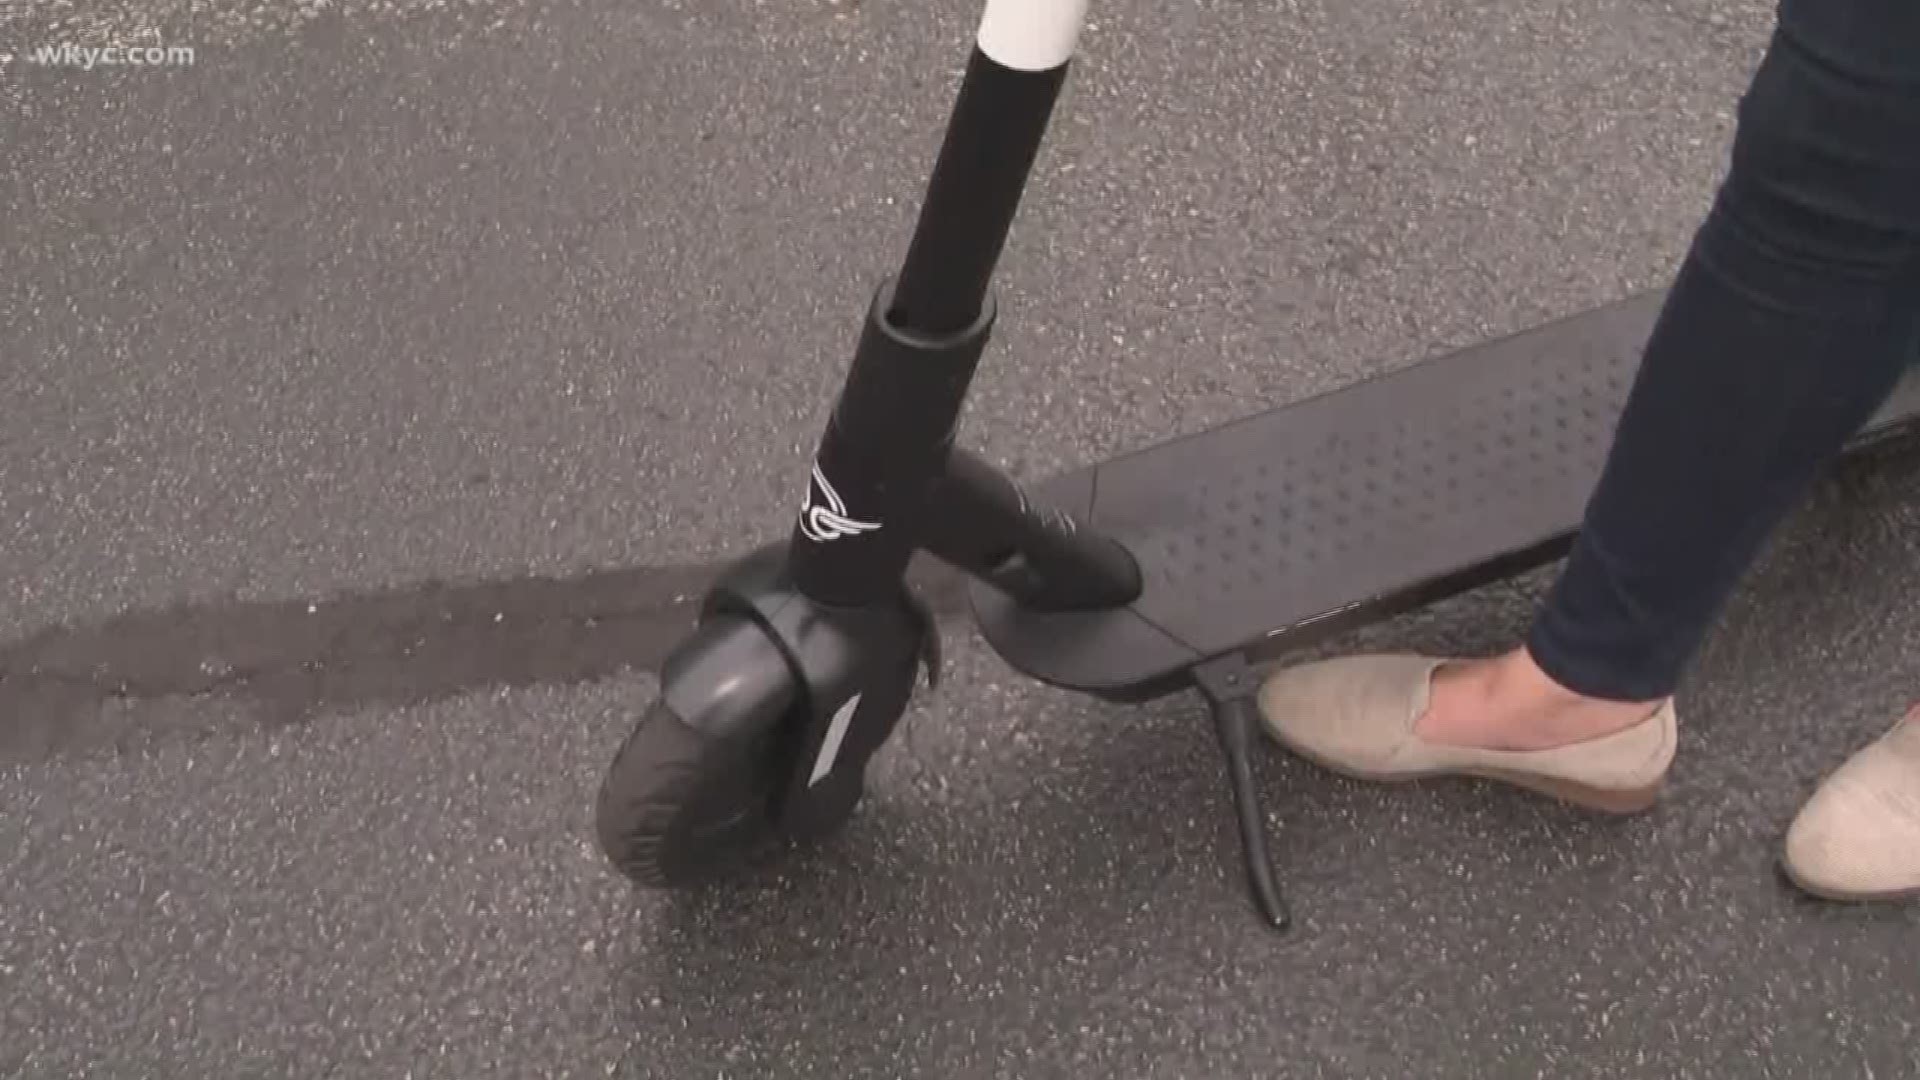 Cleveland put the brakes on bringing in those dockless scooters about a year ago, now they're back after the city passed new regulations to take extra safety precautions.